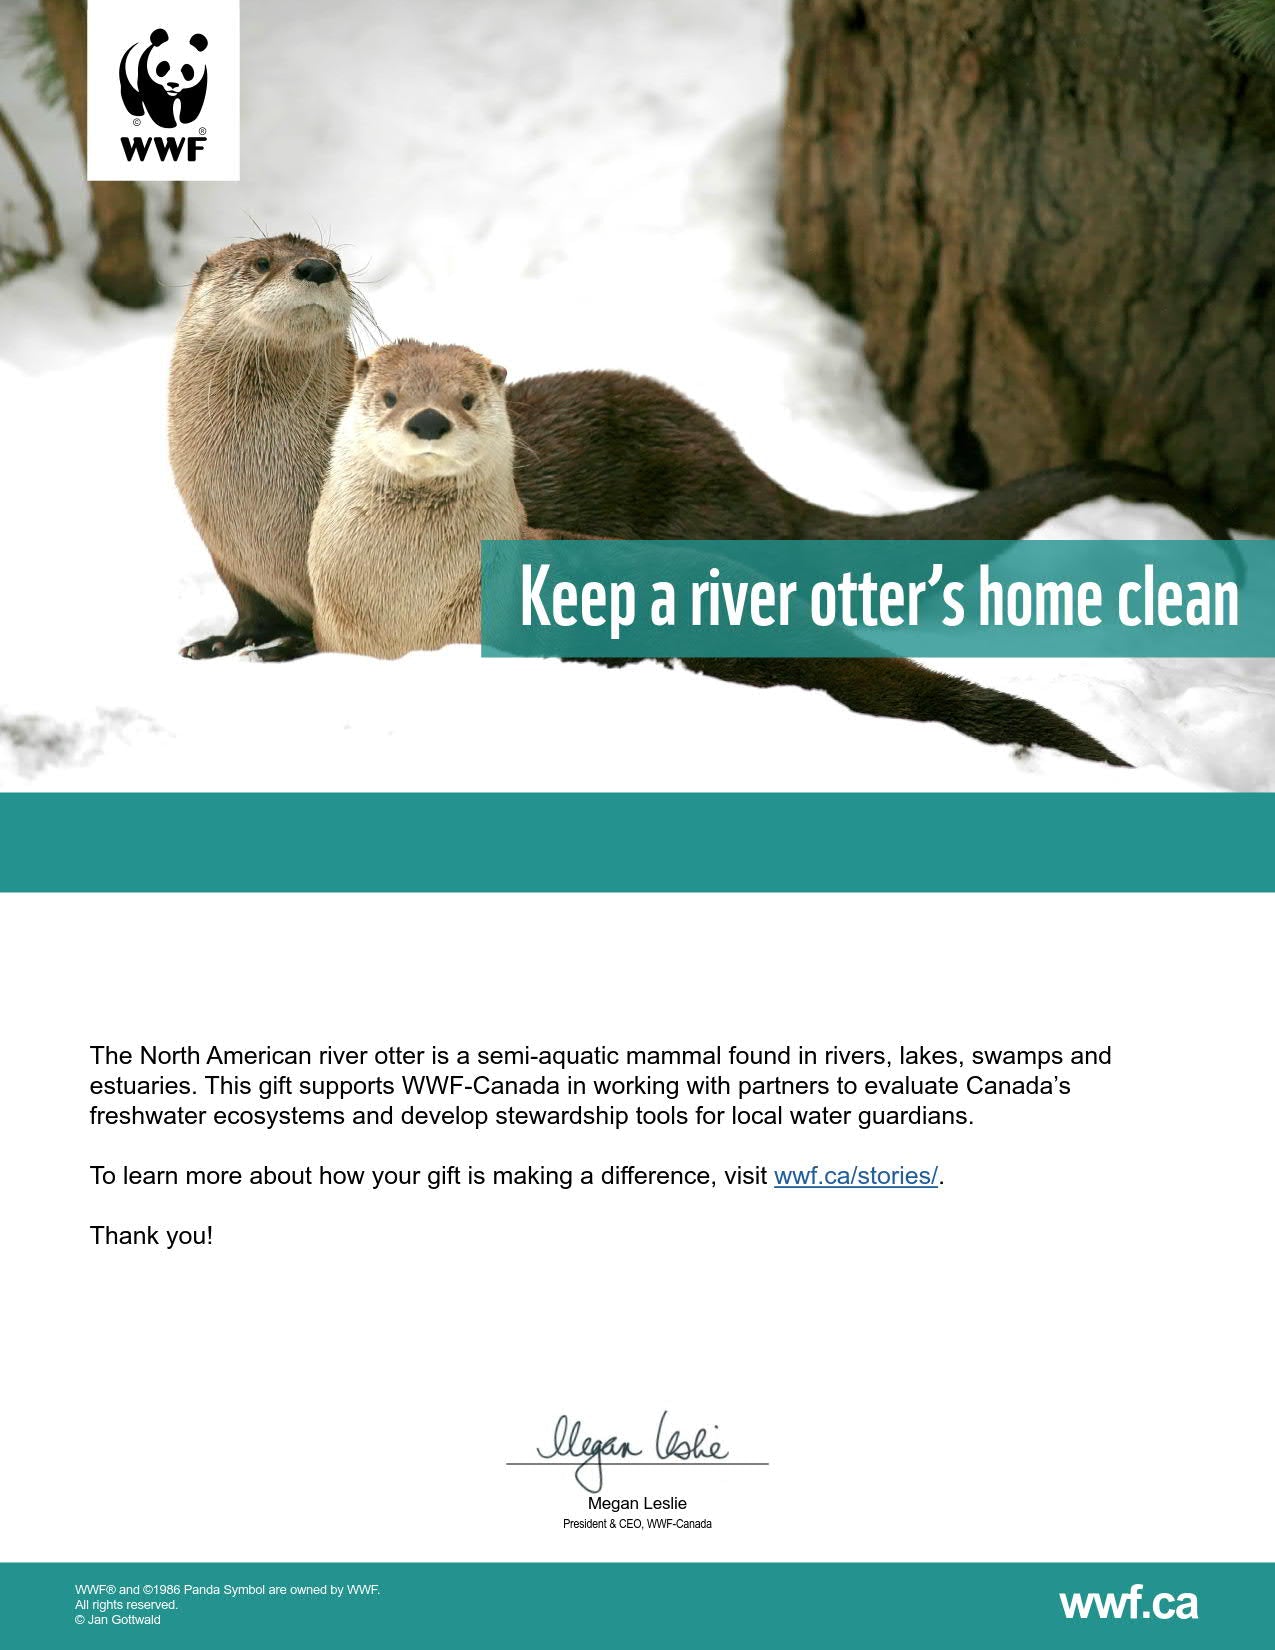 keep a river otter's home clean - WWF-Canada